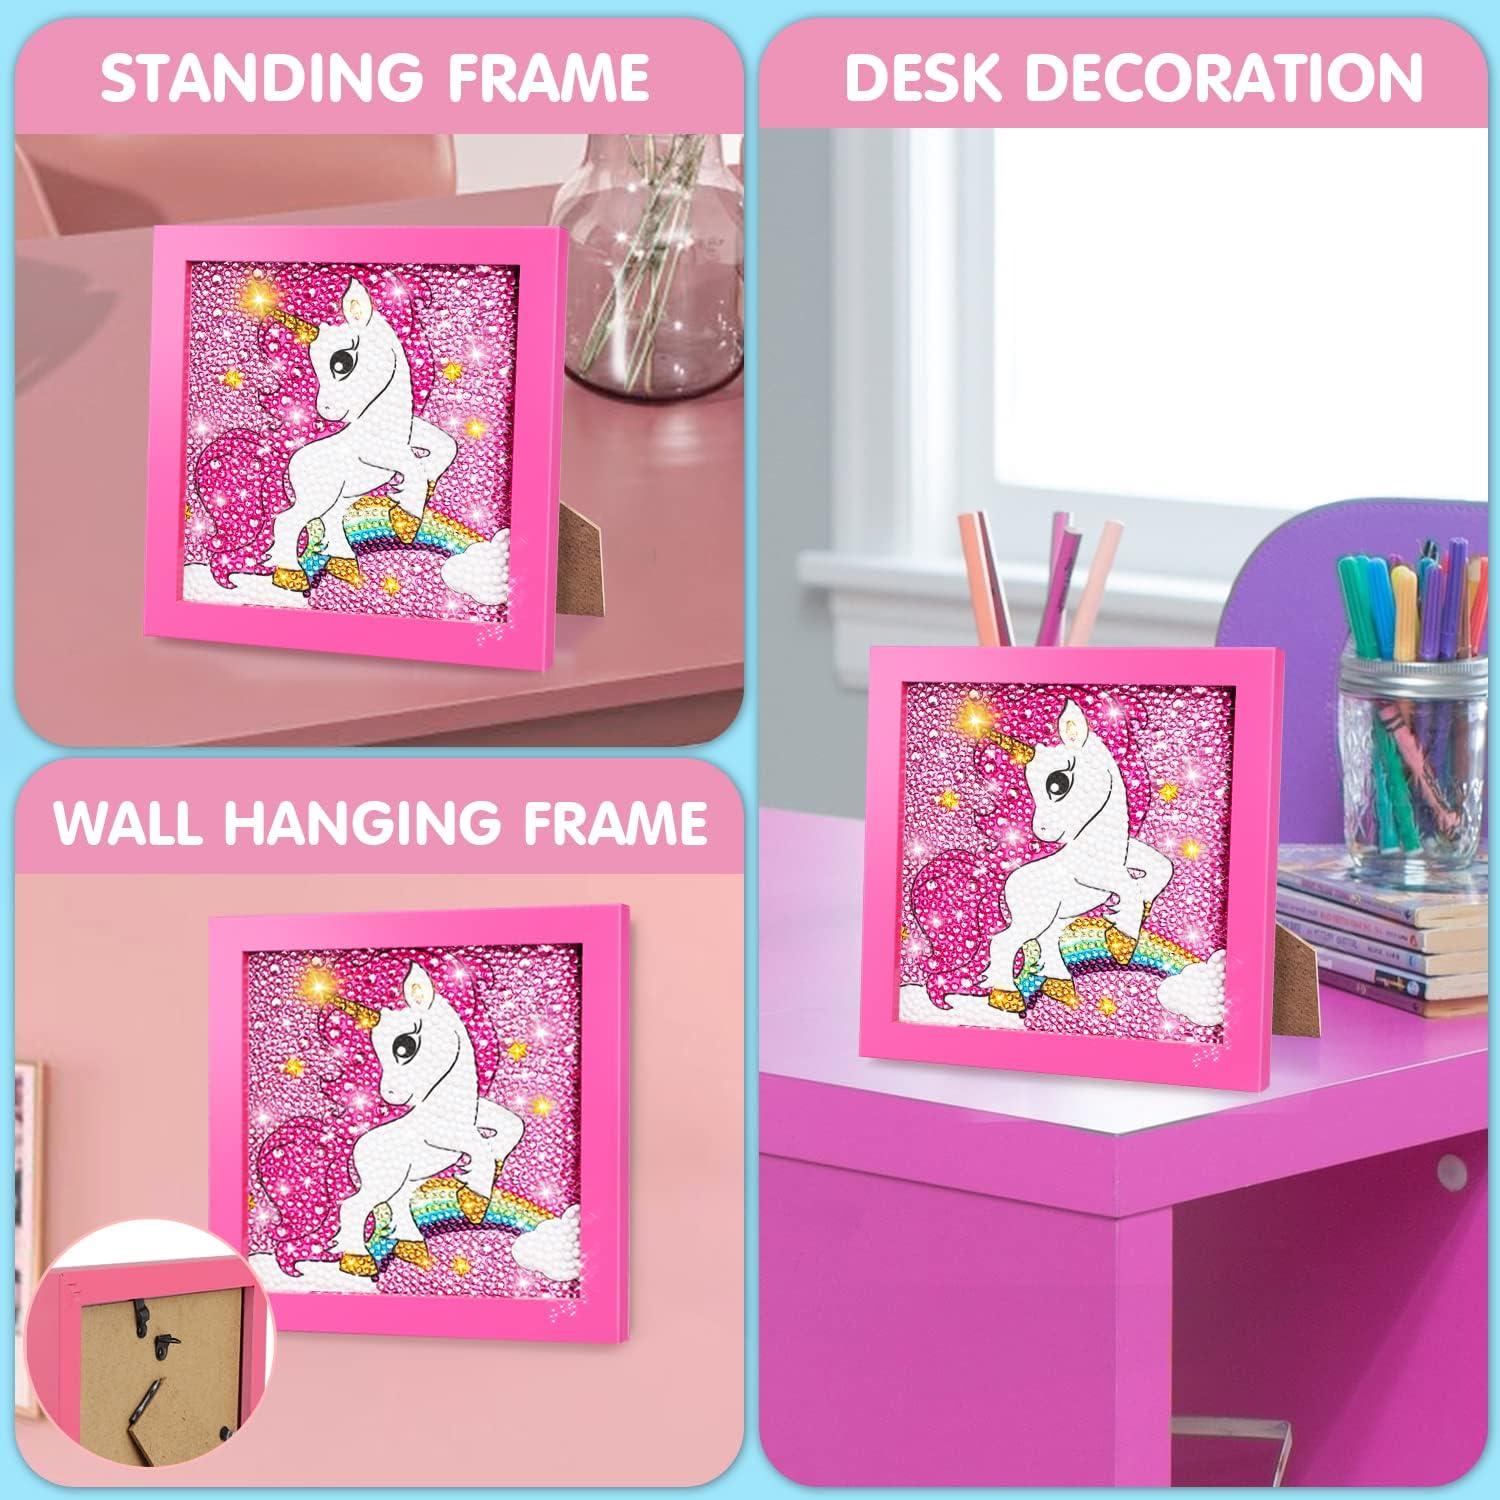 TOY Life 5D Diamond Painting Kits for Kids with Wooden Frame